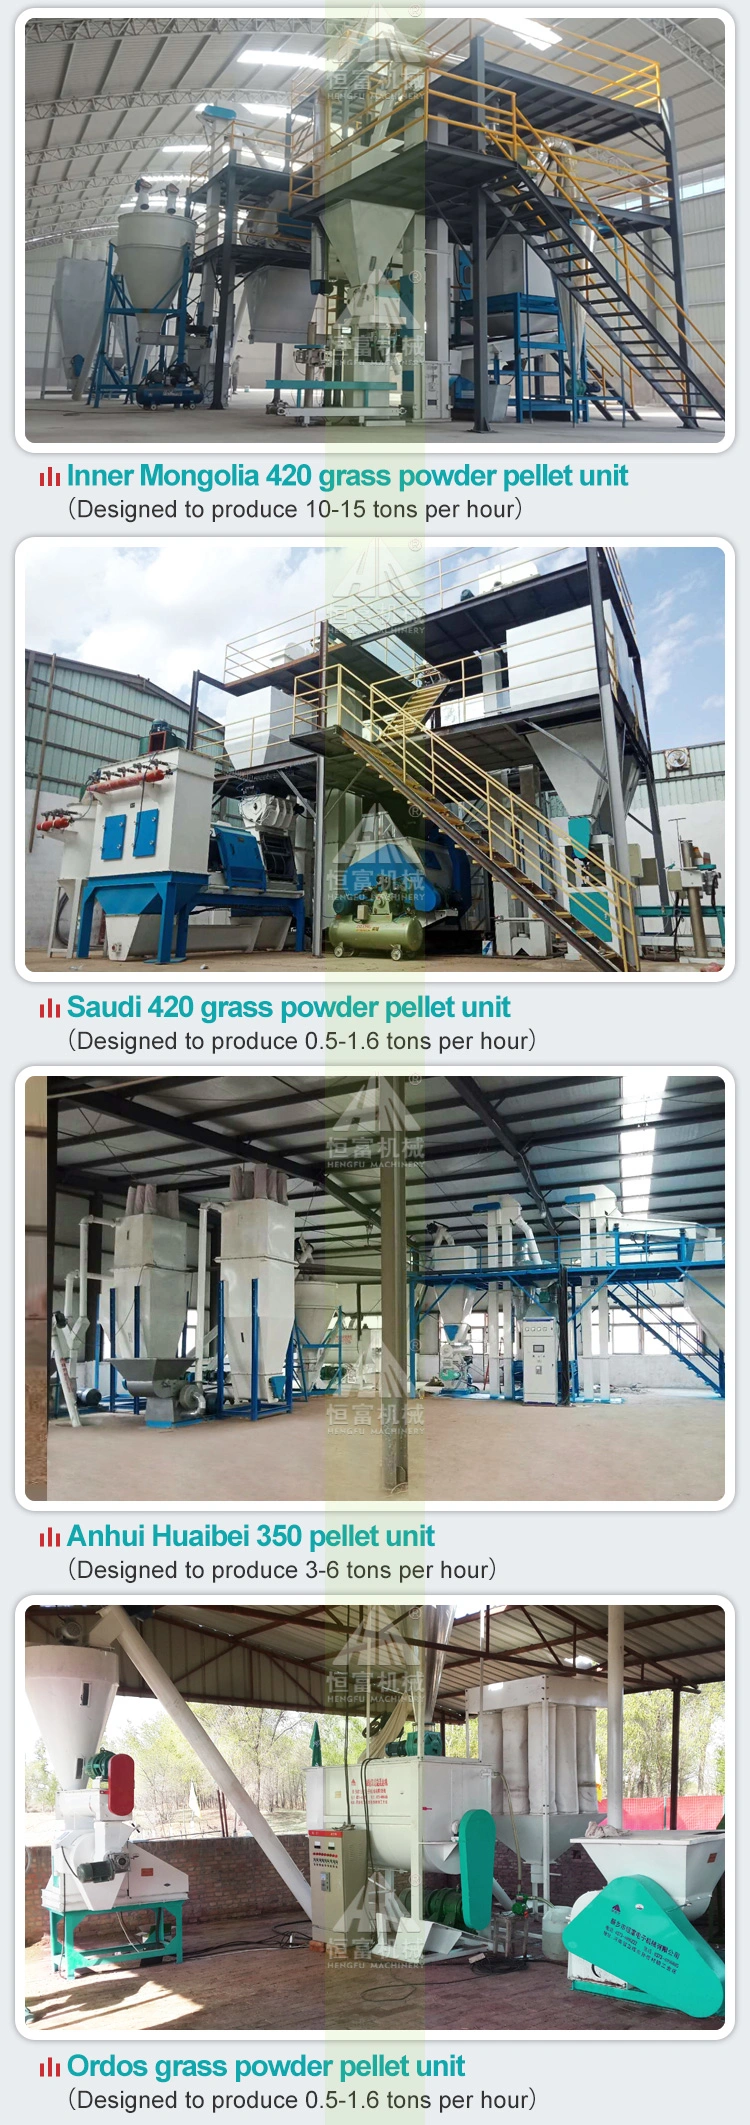 Hot Sale Flat Die Poultry Mill Plant Chicken Granulator Small Feed Pellet Machine Malaysia